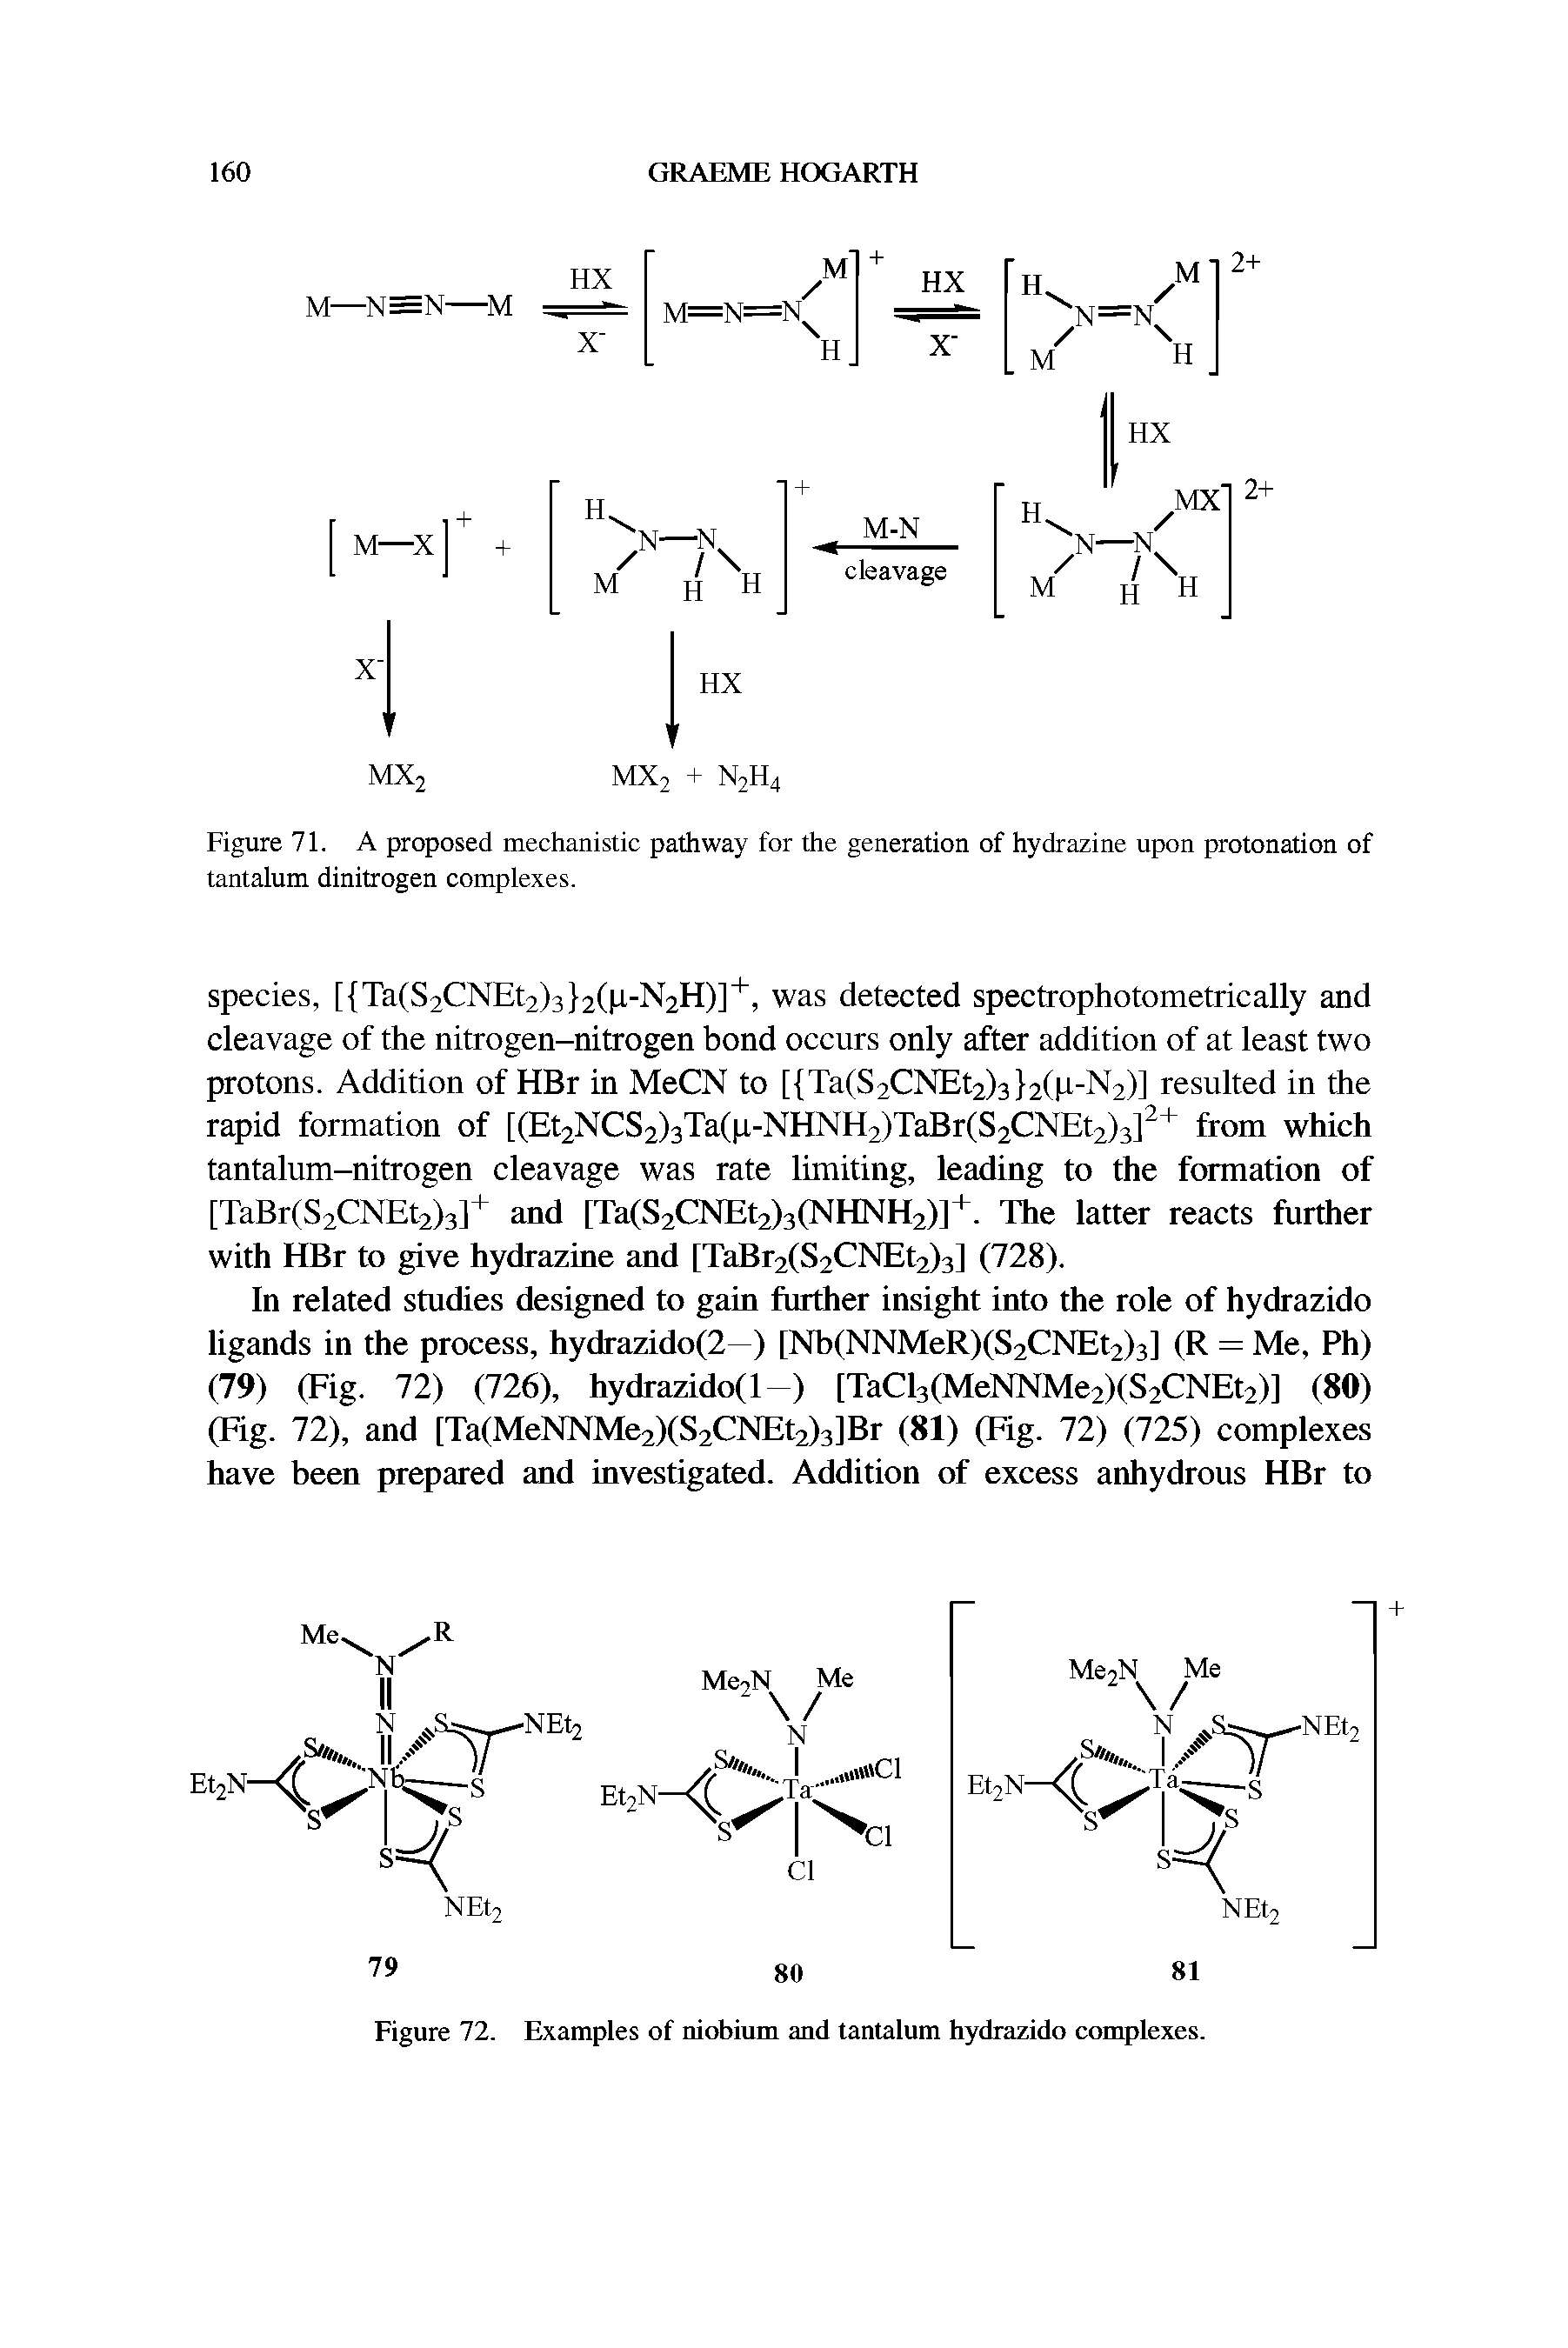 Figure 71. A proposed mechanistic pathway for the generation of hydrazine upon protonation of tantalum dinitrogen complexes.